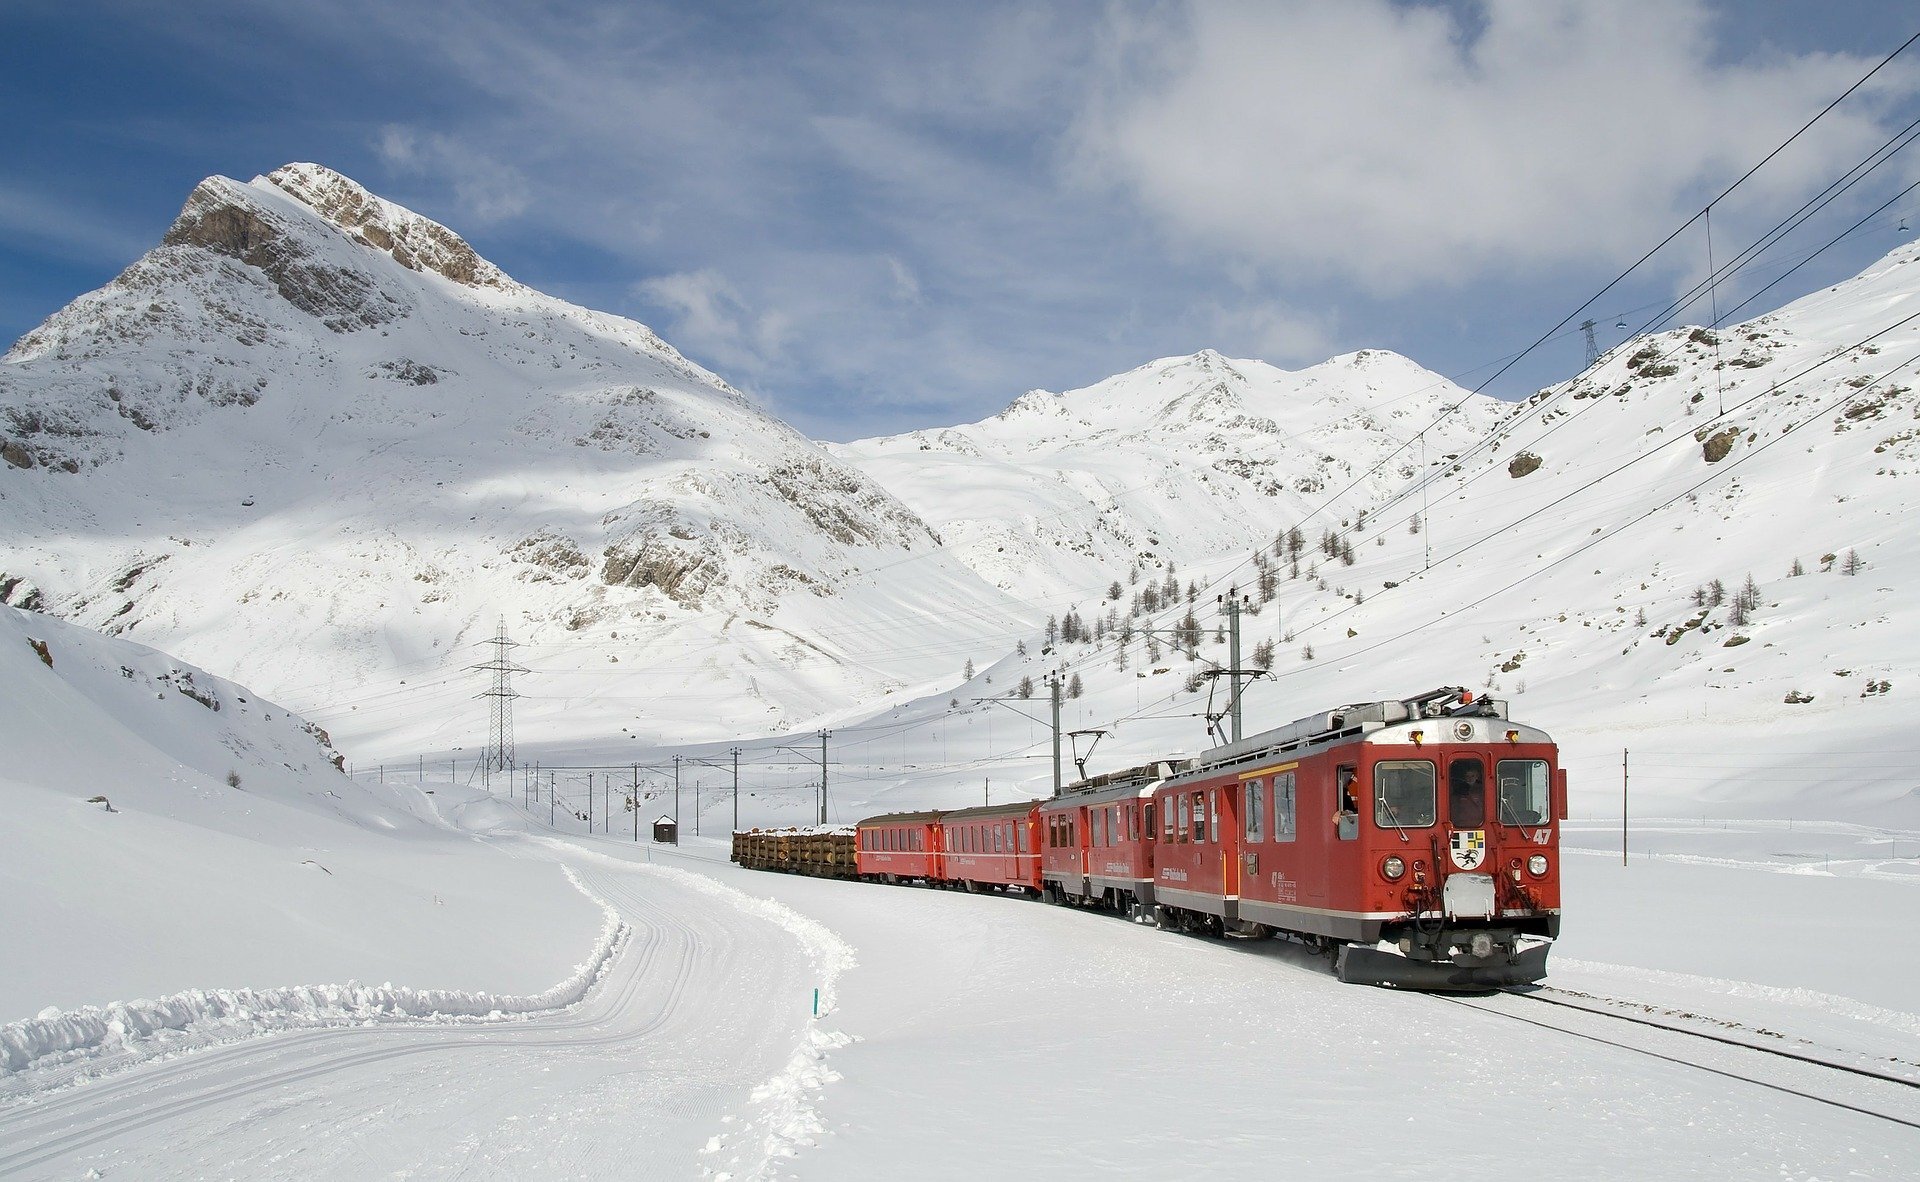 Modified rail cars clean air of carbon dioxide and help mitigate climate change